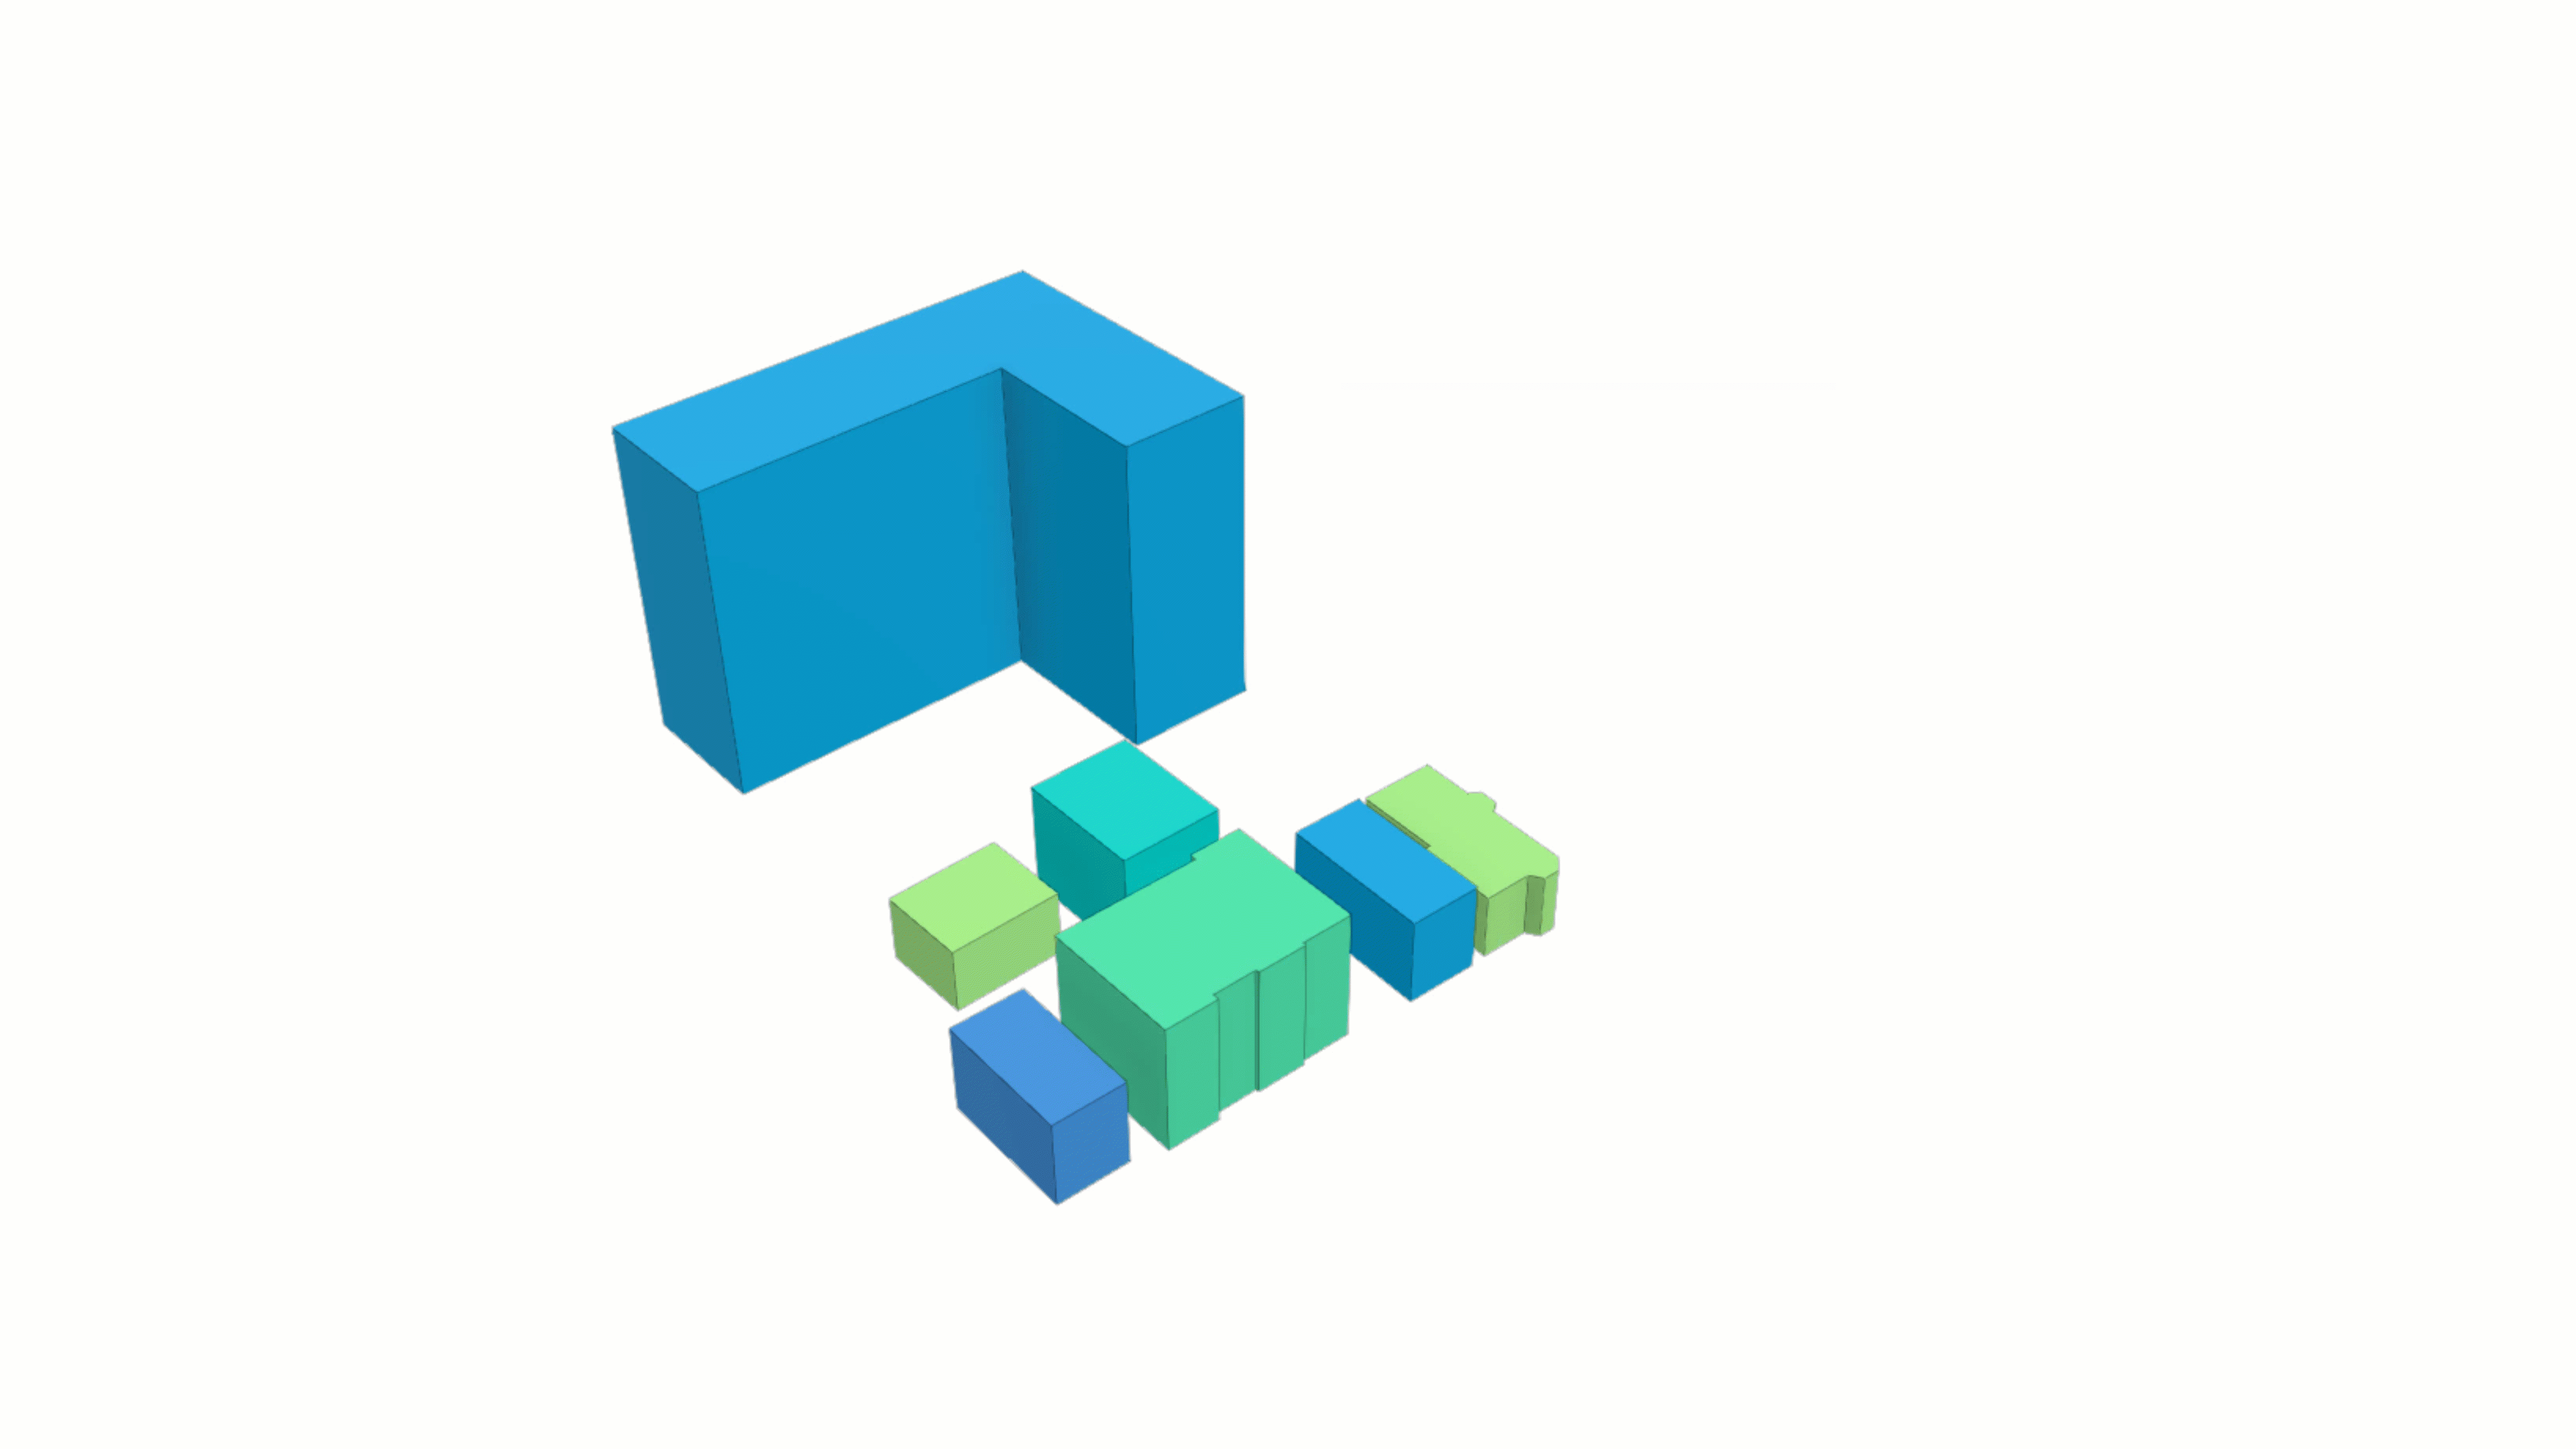 A GIF of several blue and green shapes showing a pop-up window with building properties related to a 3D building